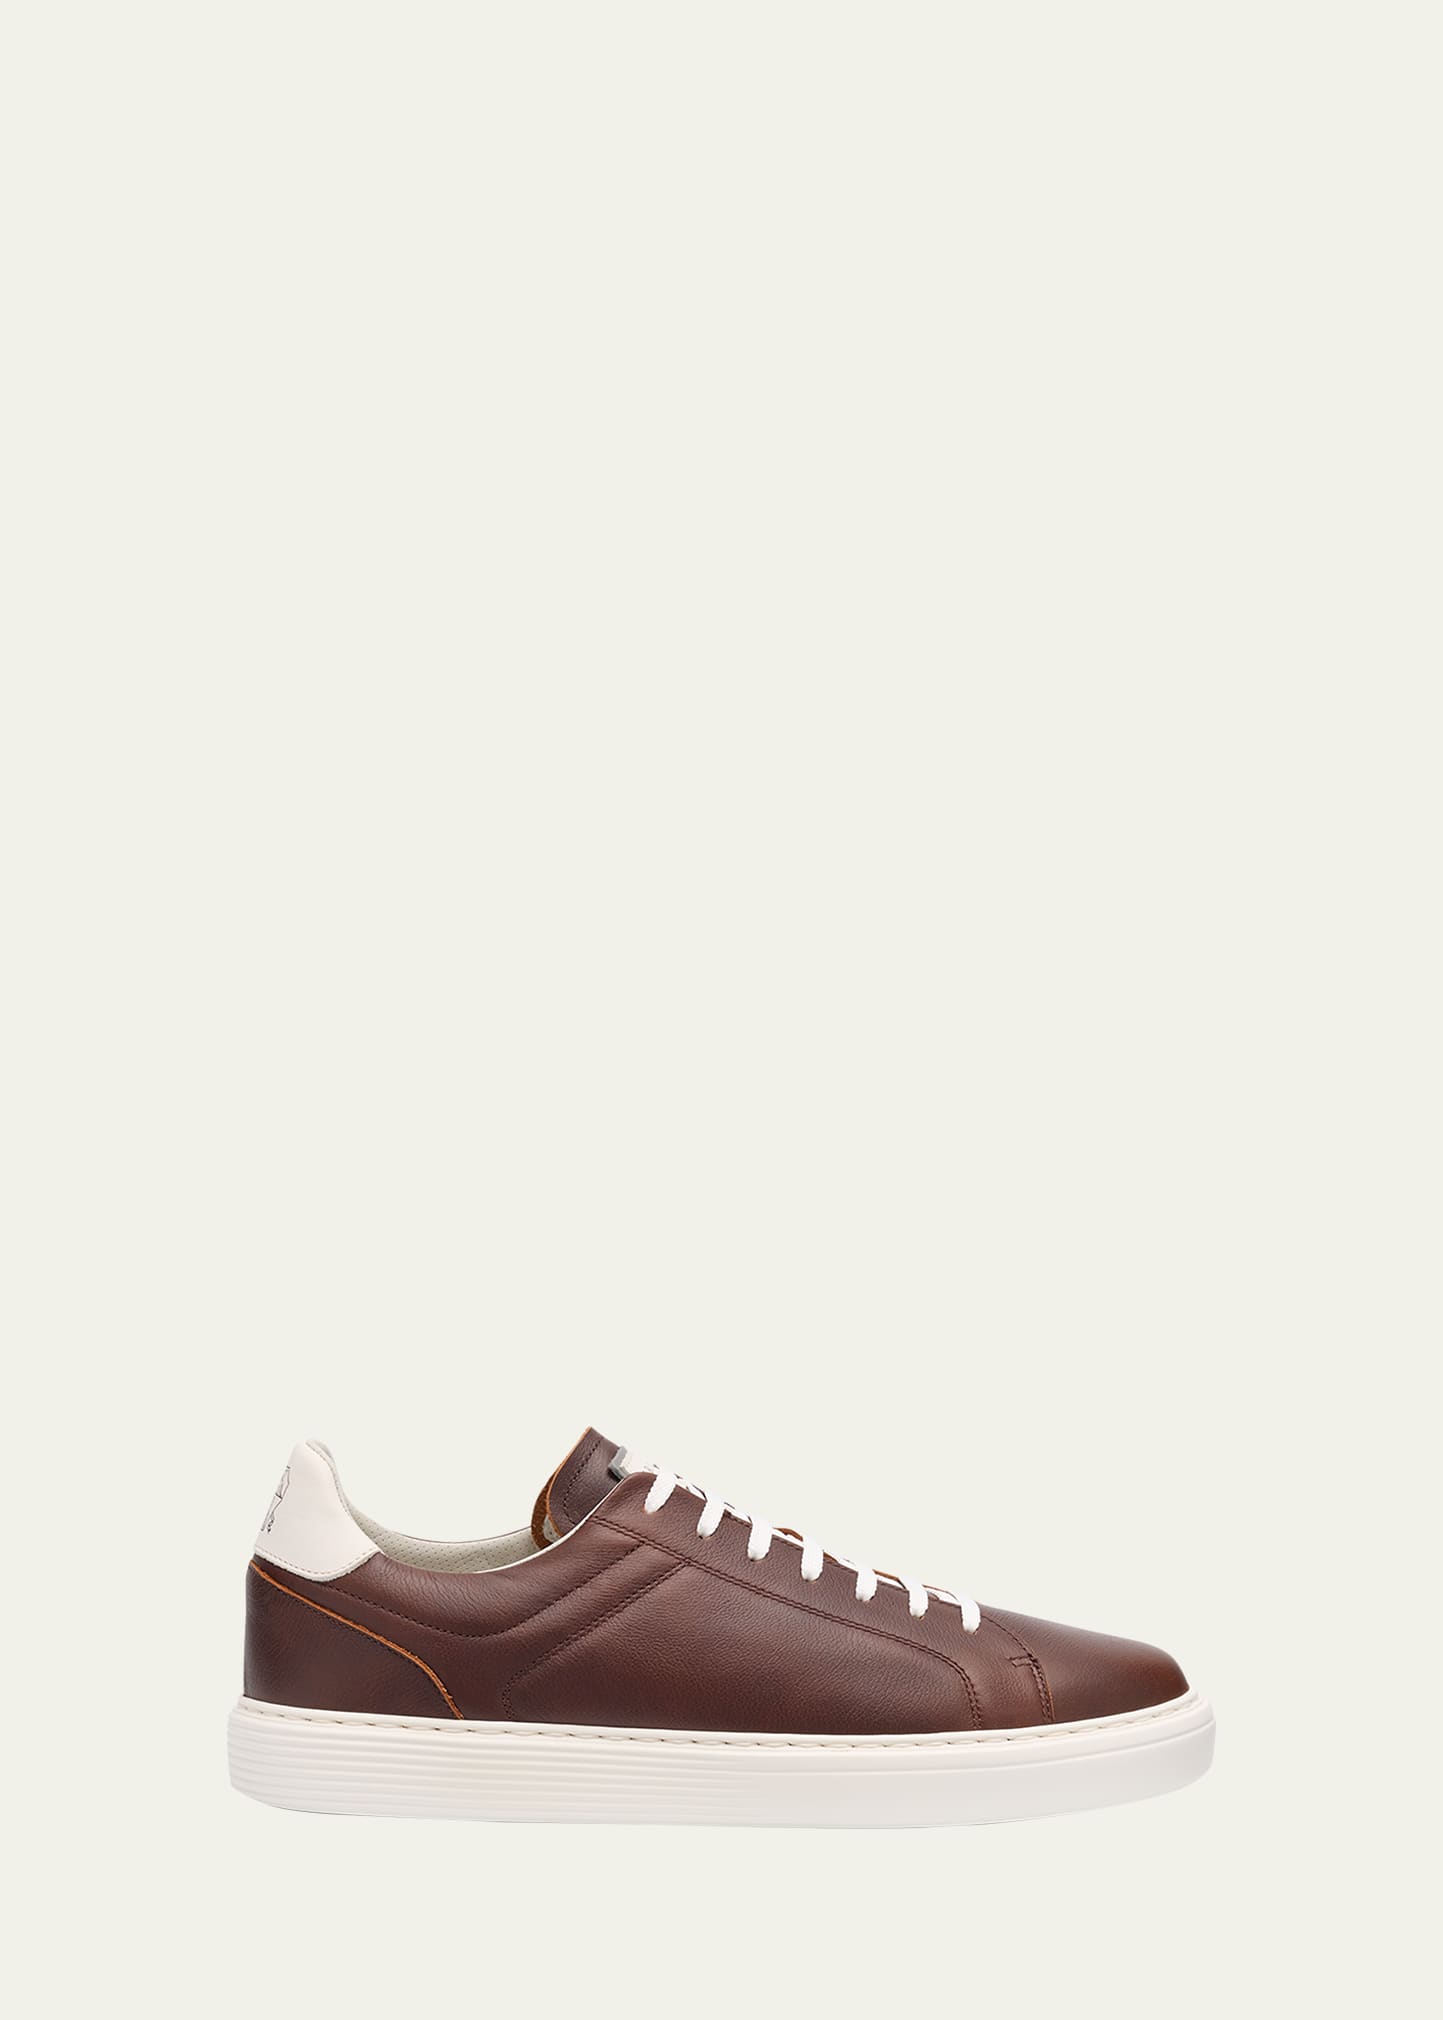 Brunello Cucinelli Men's Leather Low-top Sneakers In Cyn33 Brown